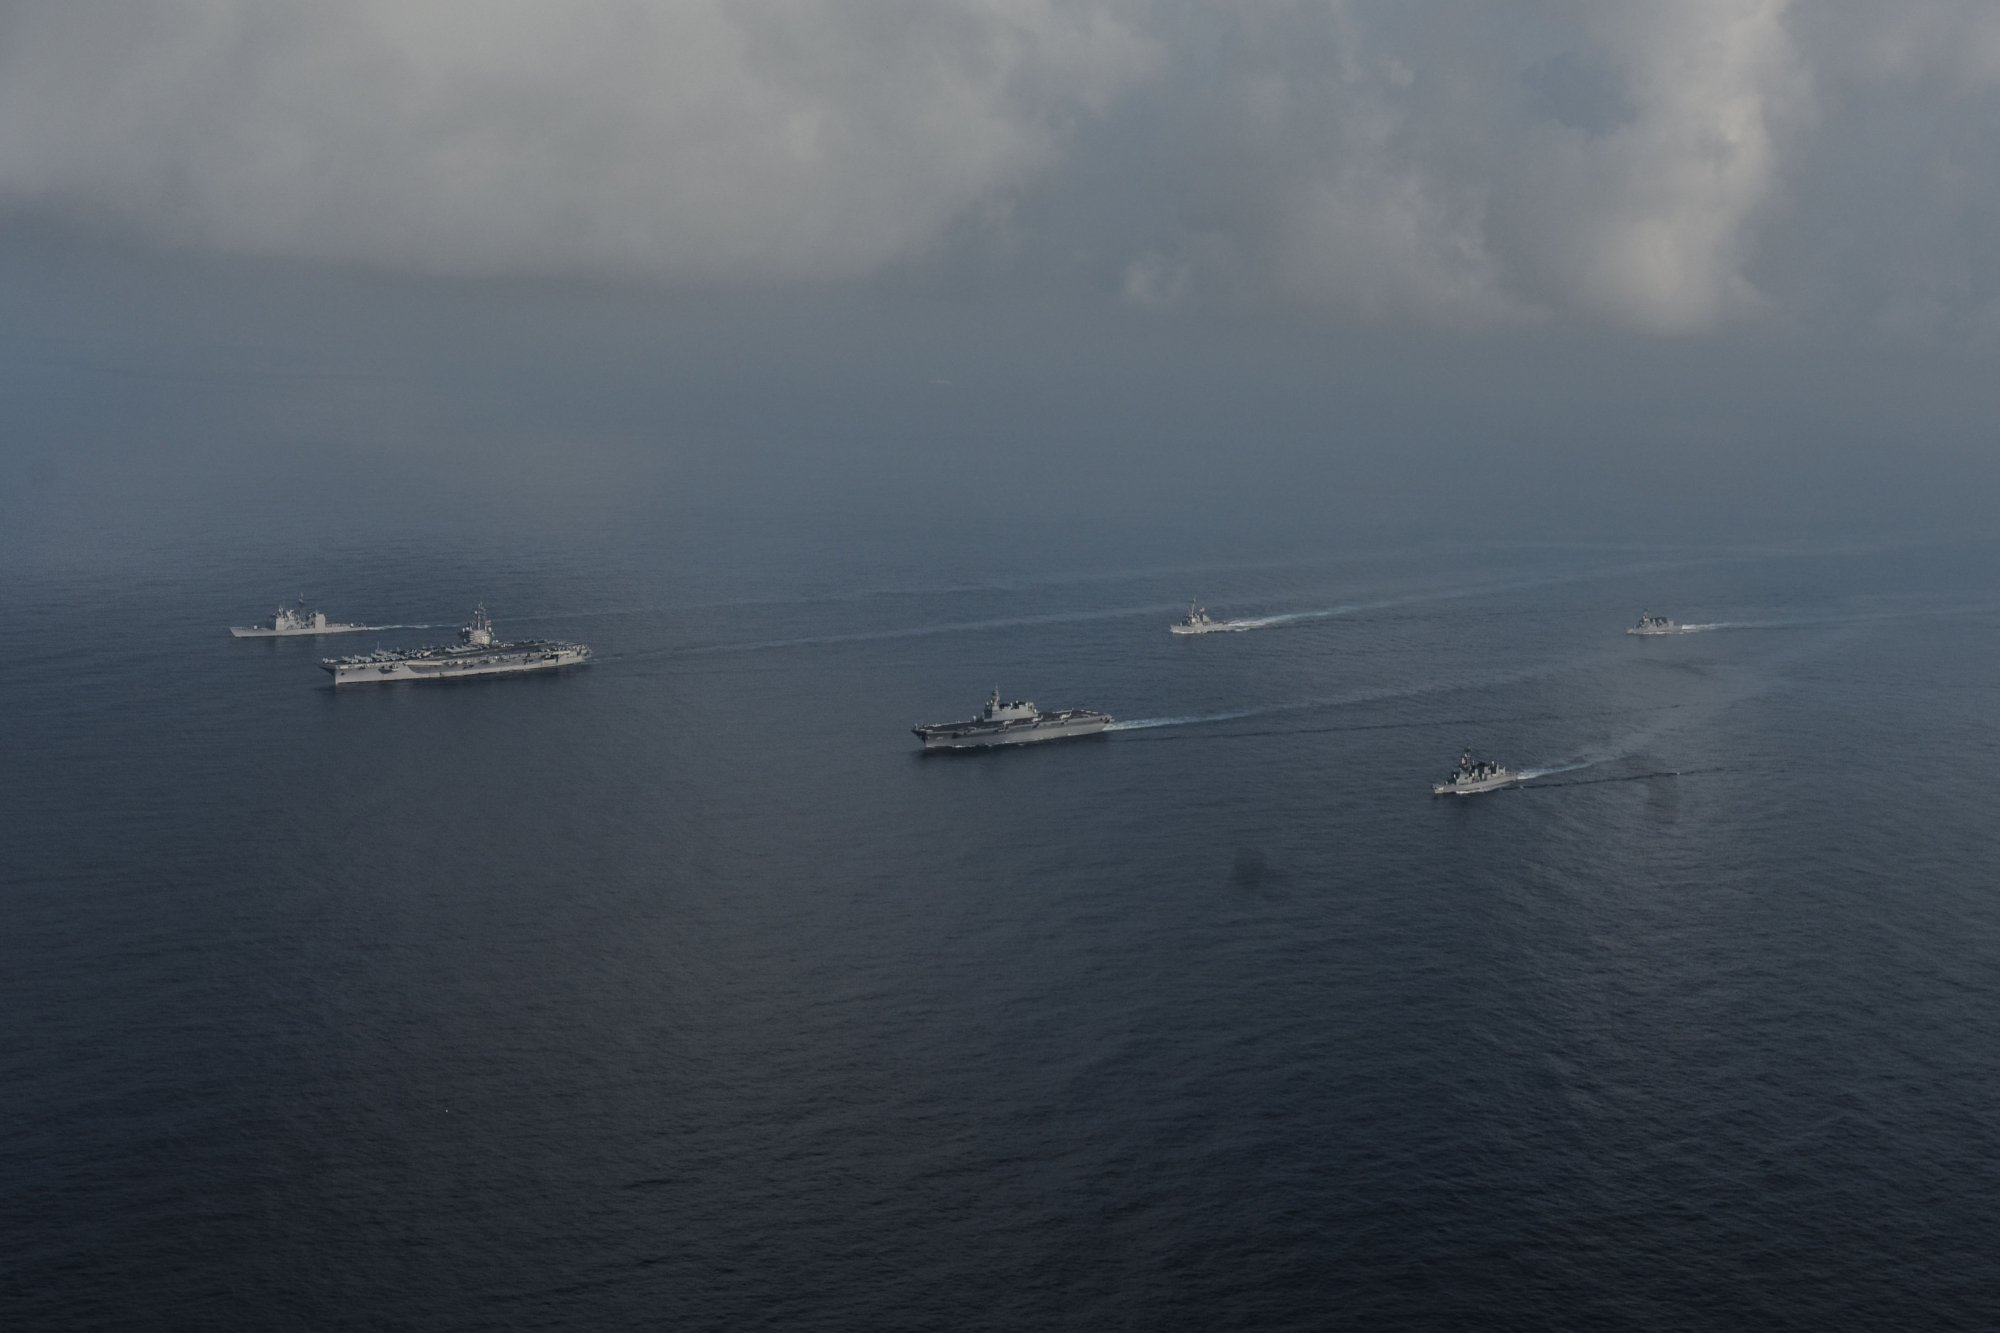 The Maritime Self-Defense Force helicopter carrier Kaga and destroyers Inazuma and Suzutsuki sail with the USS Ronald Reagan aircraft carrier and two other U.S. warships in the South China Sea on Aug. 31. | U.S. NAVY